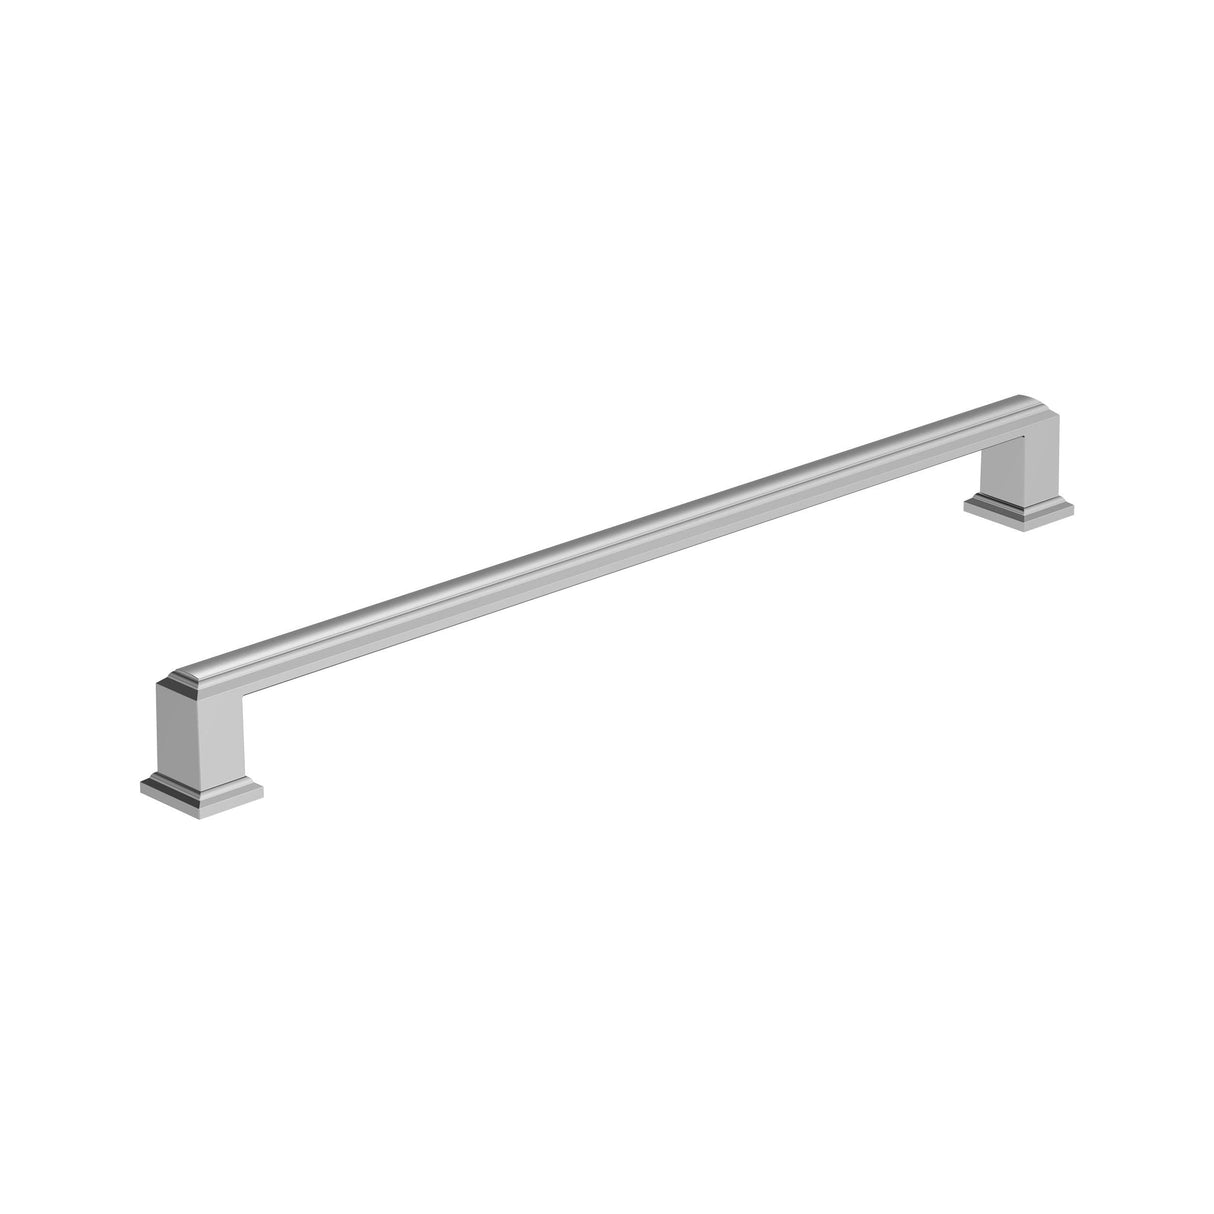 Amerock BP3736126 Polished Chrome Cabinet Pull 10-1/16 in (256 mm) Center-to-Center Cabinet Handle Appoint Drawer Pull Kitchen Cabinet Handle Furniture Hardware